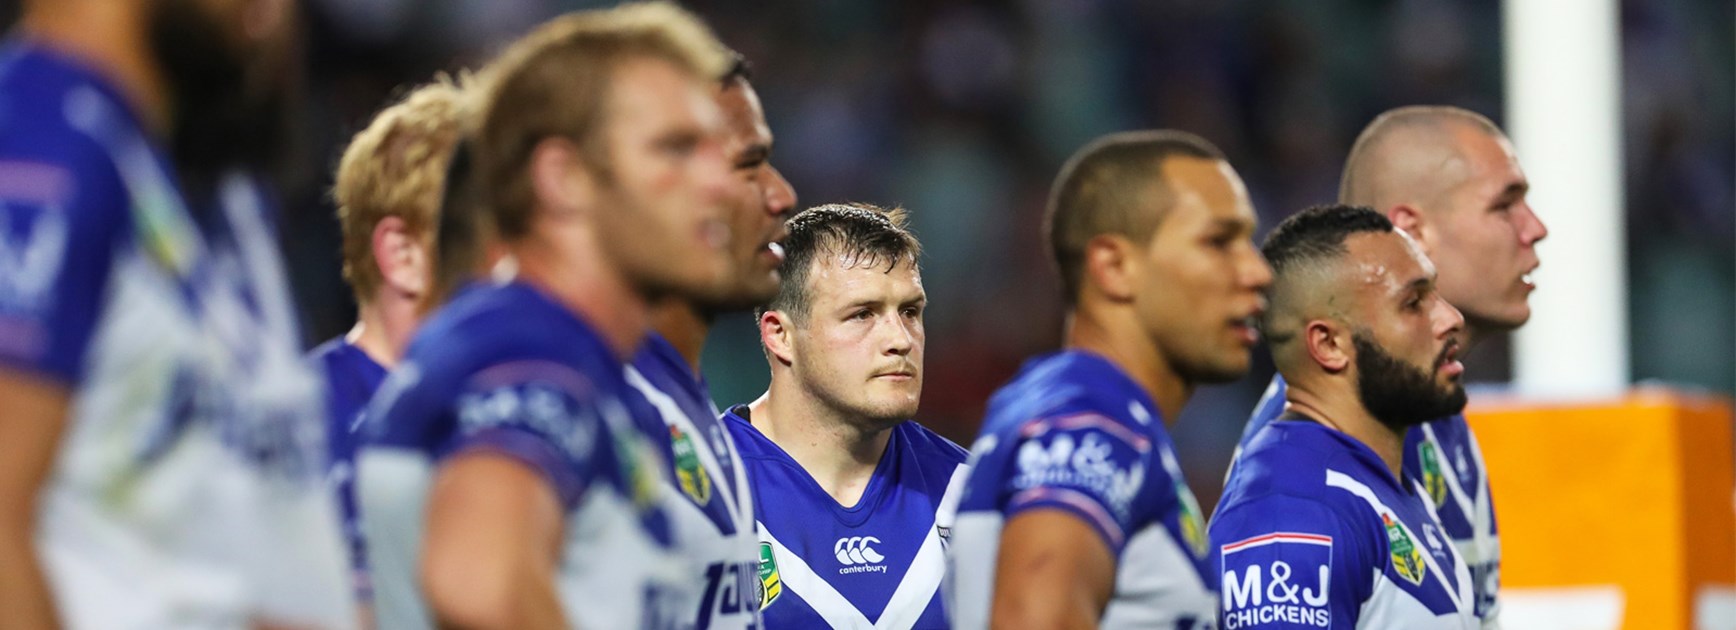 The Bulldogs' season came to an end at the hands of the Panthers in the opening week of the NRL Finals Series.